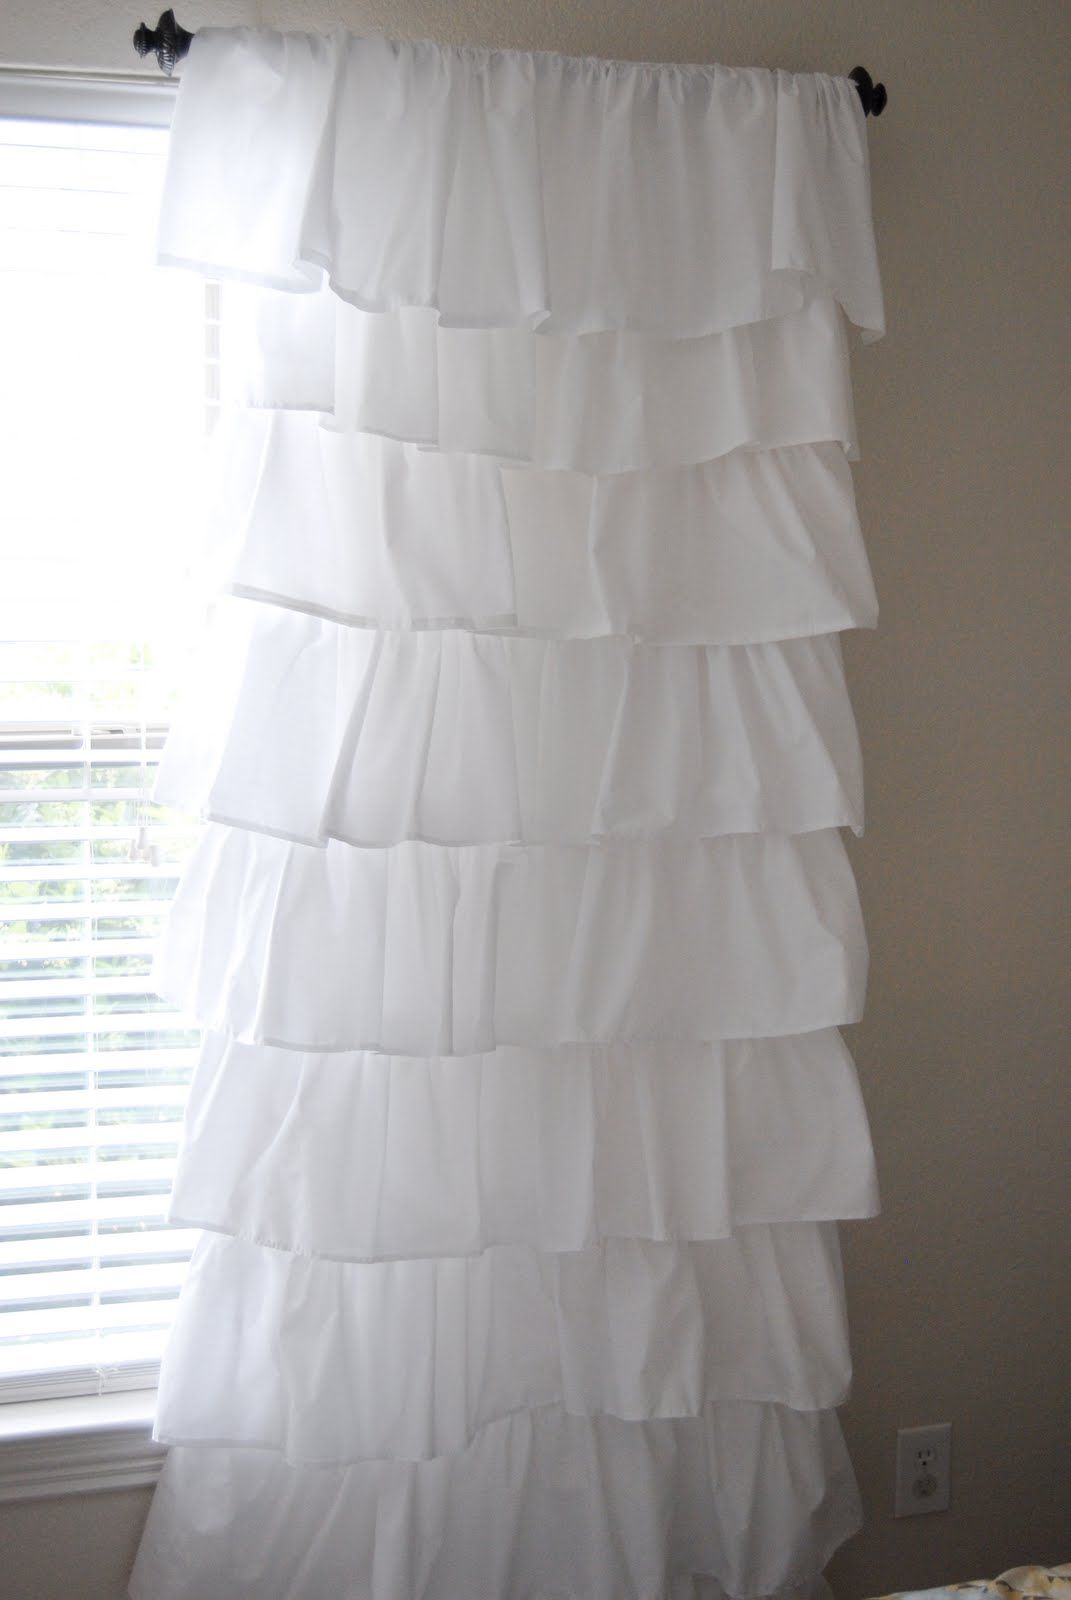 Make your own expensive looking ruffled curtains using $4 flat sheets from Walma